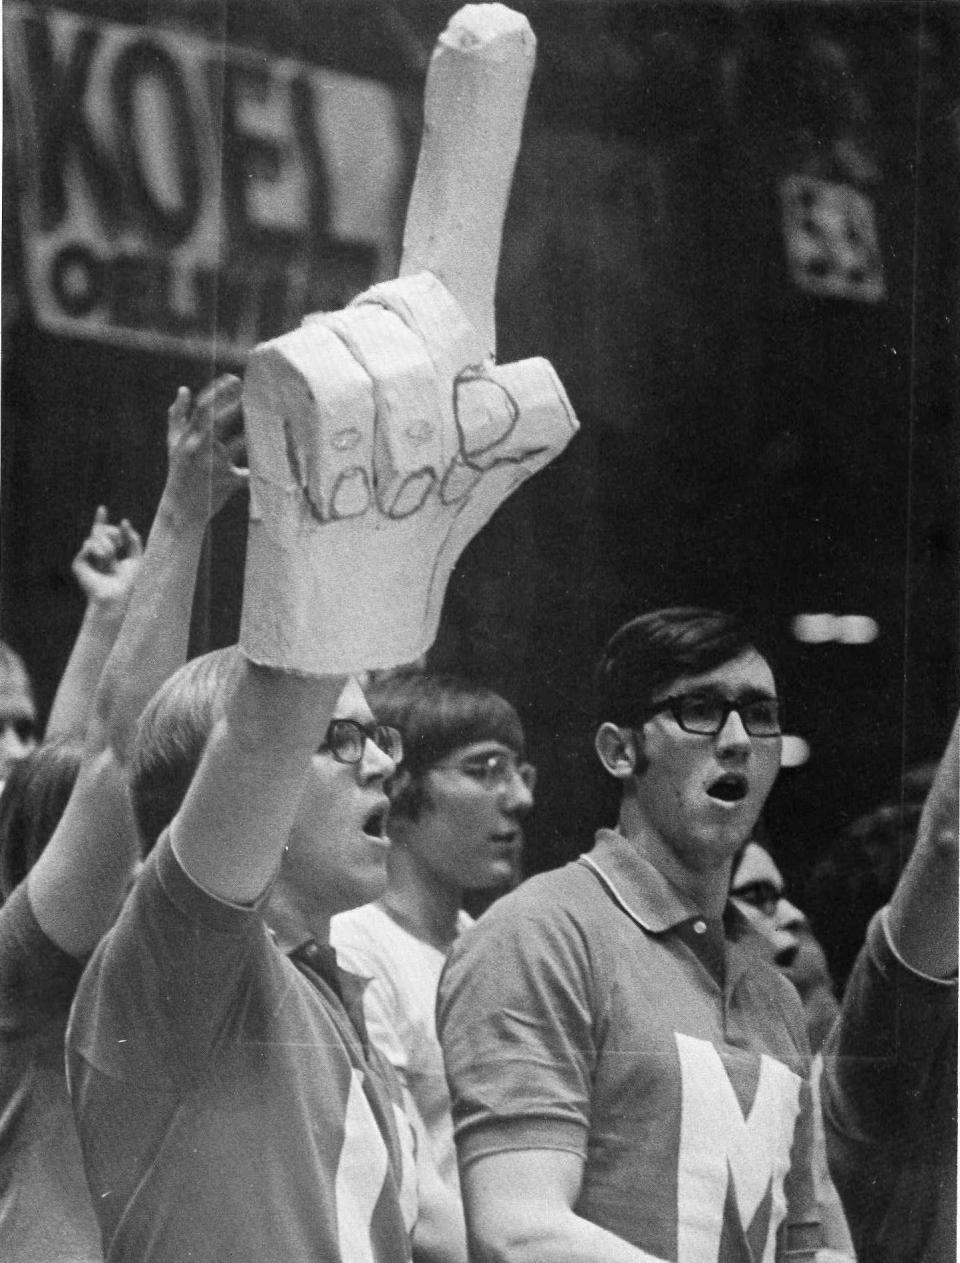 Foam finger creator Steve Chmelar brought his homemade creation to the Iowa High School Athletic Association’s boys state basketball finals in 1971. The Associated Press snapped a photo of him, which appeared in the <em>Des Moines Tribune</em>, and the No. 1 hand, better known as the foam finger, was born. (Courtesy of Steve Chmelar)